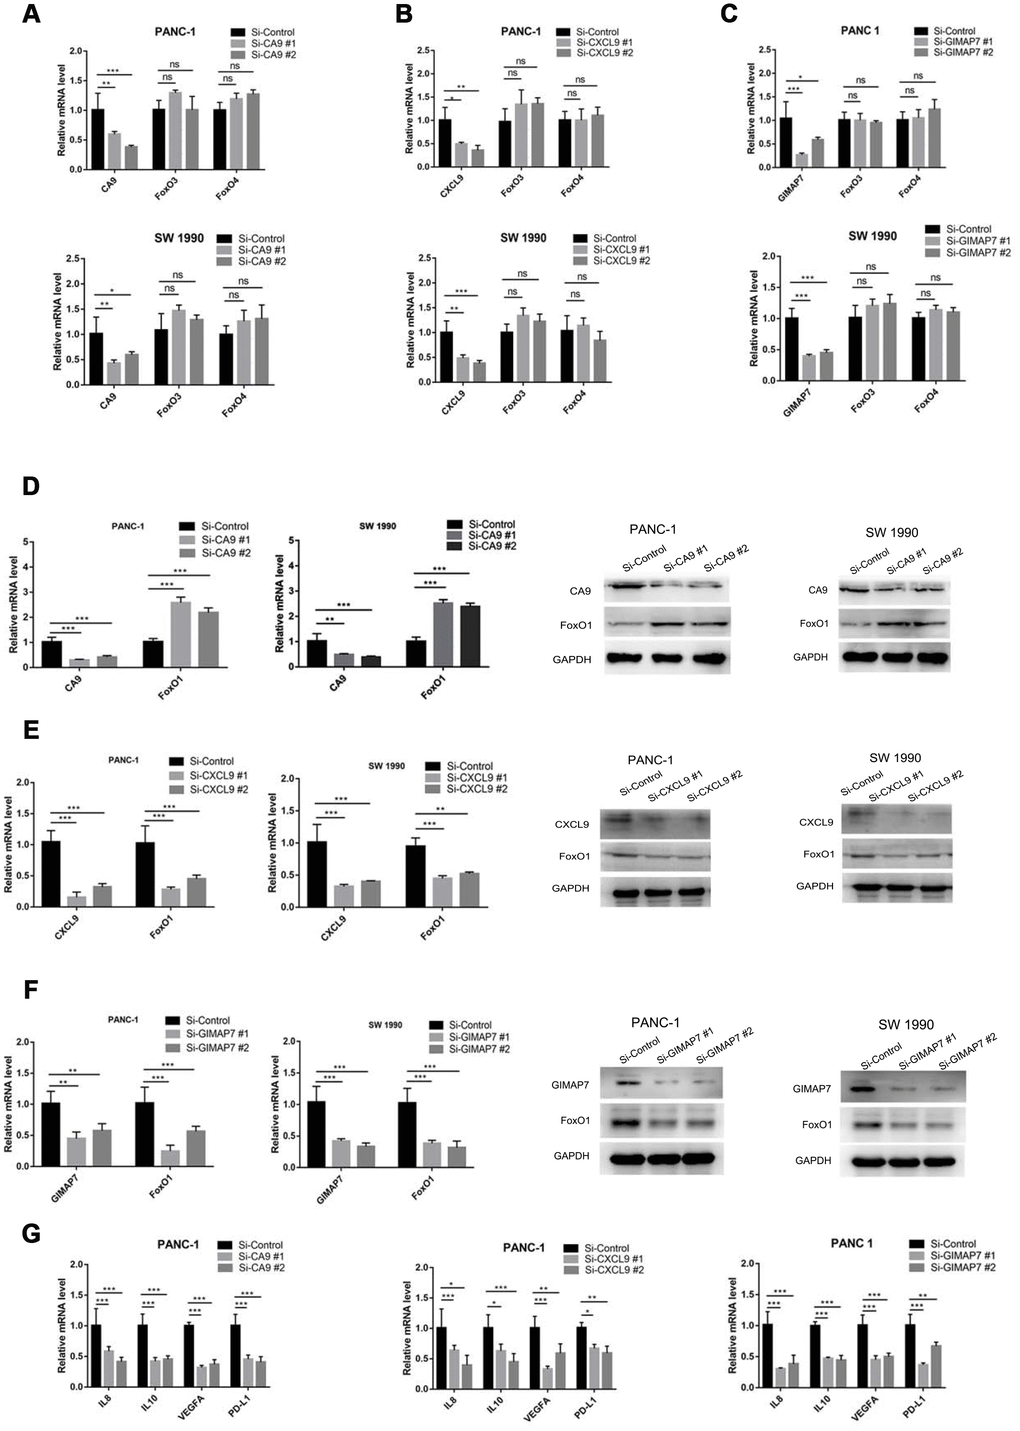 CA9, CXCL9, and GIMAP7 regulate the expression level of FOXO1 in PAAD. PANC-1 and SW 1990 cells were transfected with indicated siRNA. Then, 24 hrs post-transfection, cells were harvested for RT-qPCR. The data shown were the mean values ± SD from three replicates. *, P A–C) PANC-1 and SW 1990 cells transfected with Si-CA9 (A), Si-CXCL9 (B) and Si-GIMAP7 (C) were harvested for RT-qPCR. (D–F) PANC-1 and SW 1990 cells transfected with Si-CA9 (D), Si-CXCL9 (E) and Si-GIMAP7 (F) were harvested for RT-qPCR and western blotting. (G) PANC-1 cells transfected with Si-CA9 (C), Si-CXCL9 (E), or Si-GIMAP7 (G) were harvested for RT-qPCR.